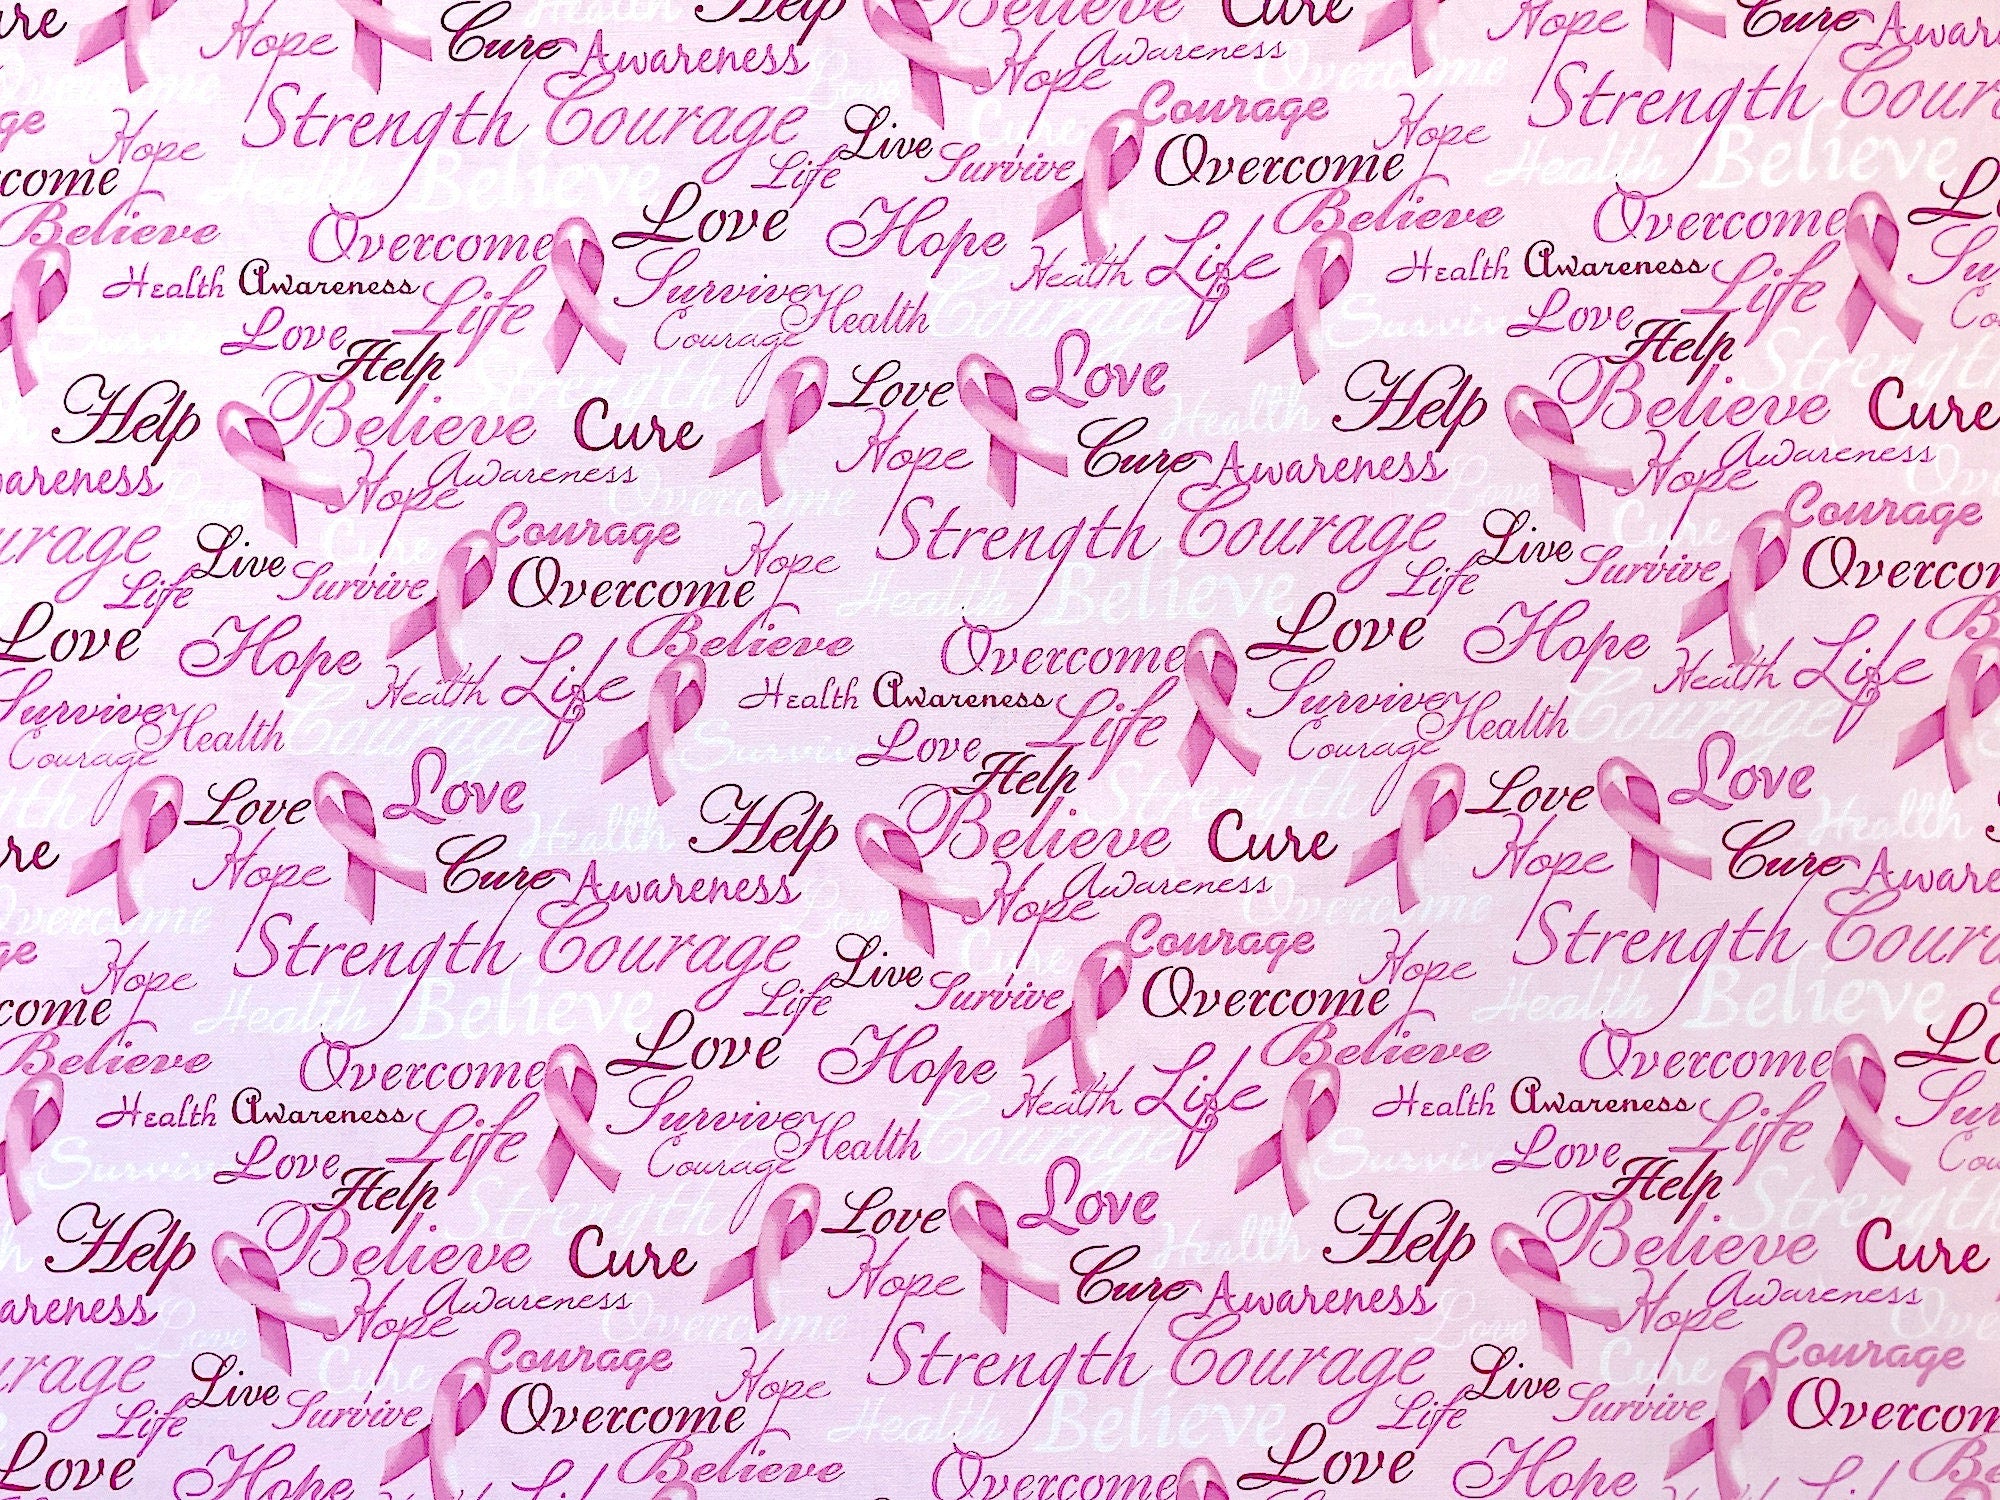 This pink awareness fabric is covered with words such as love, hope, cure, believe, awareness, help, strength, overcome and more. There are also pink ribbons throughout the fabric